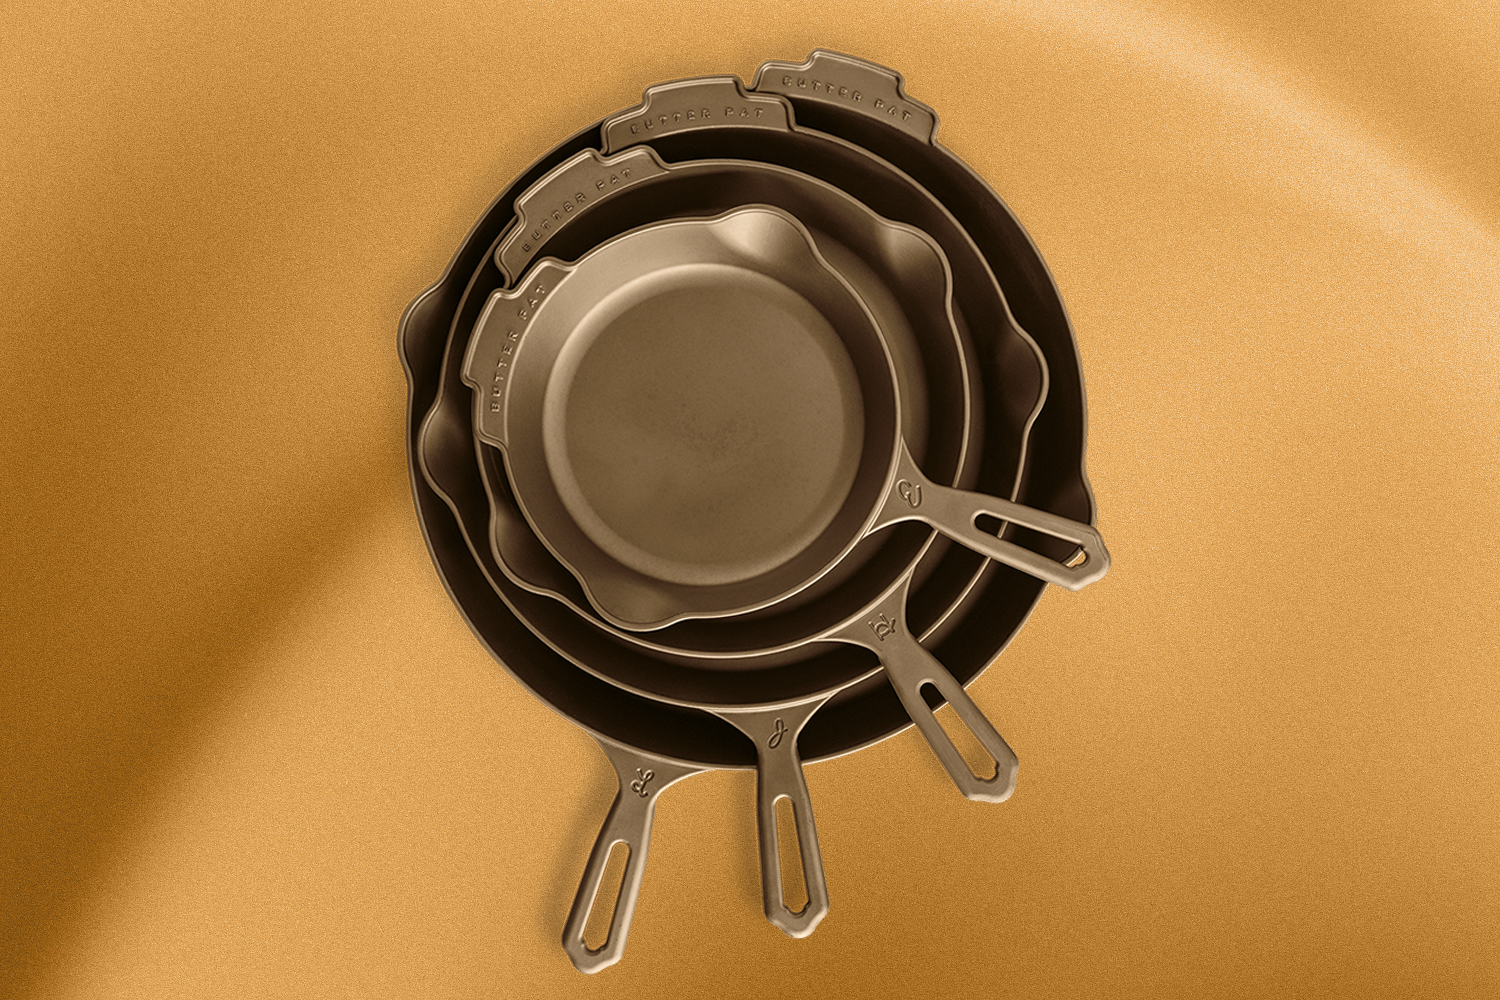 Are fancy pans worth their weight?